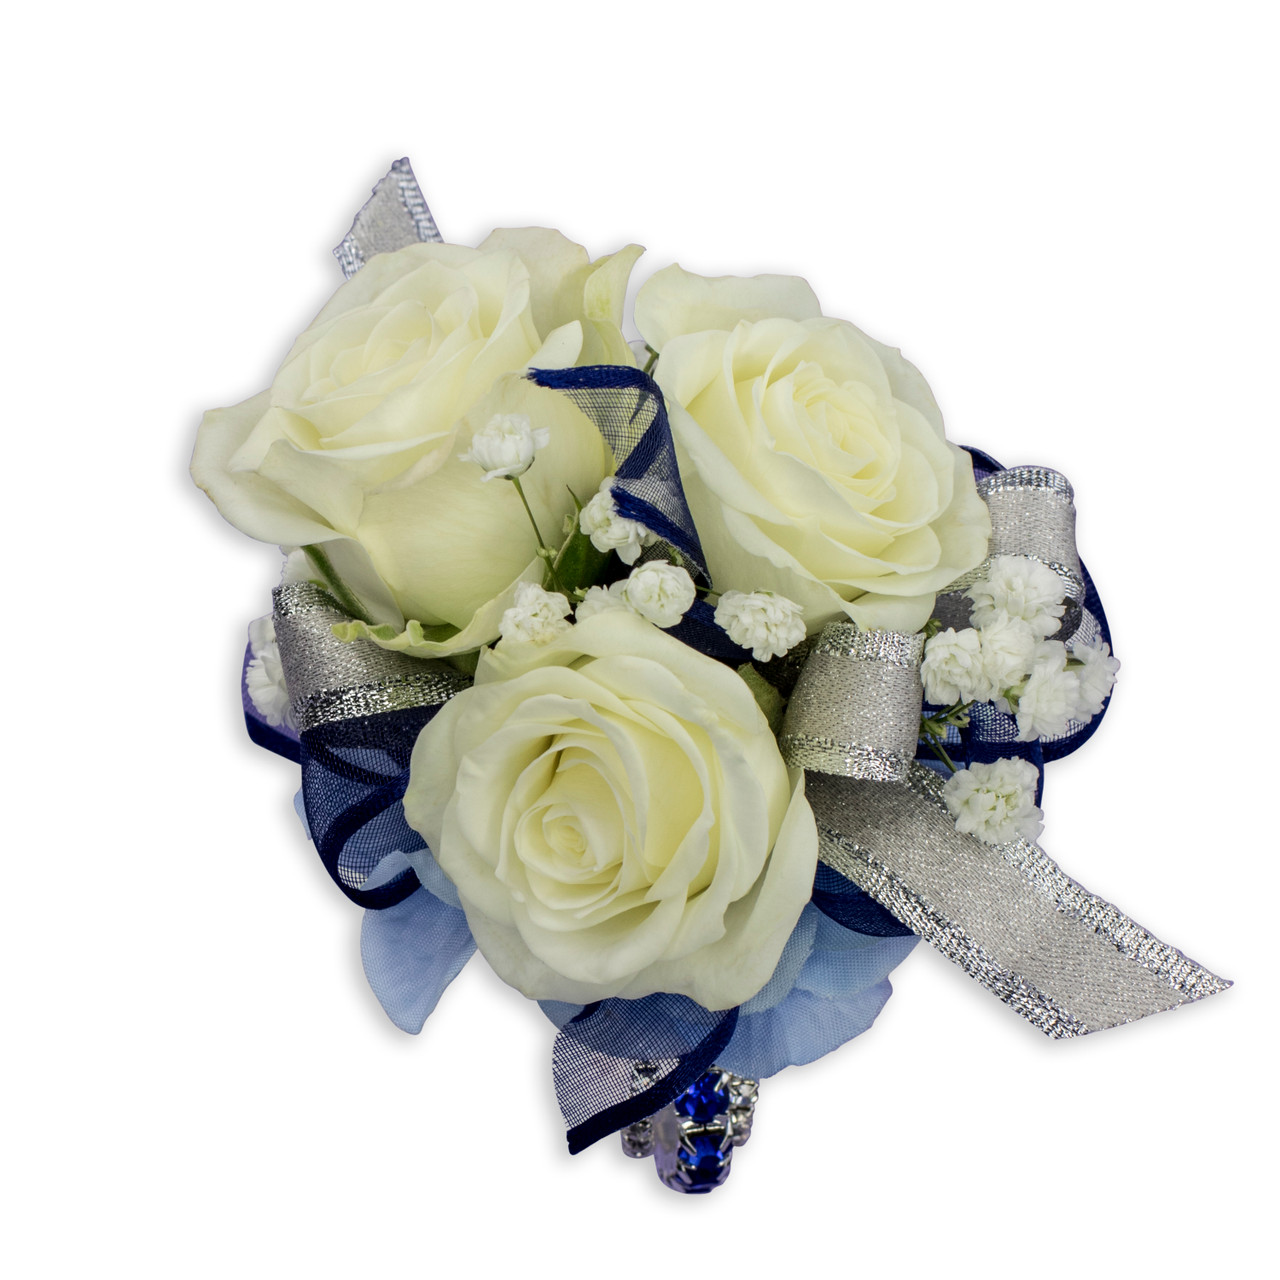 White Rose Wrist Corsage with Iridescent Ribbon & Bling in Avon, NY